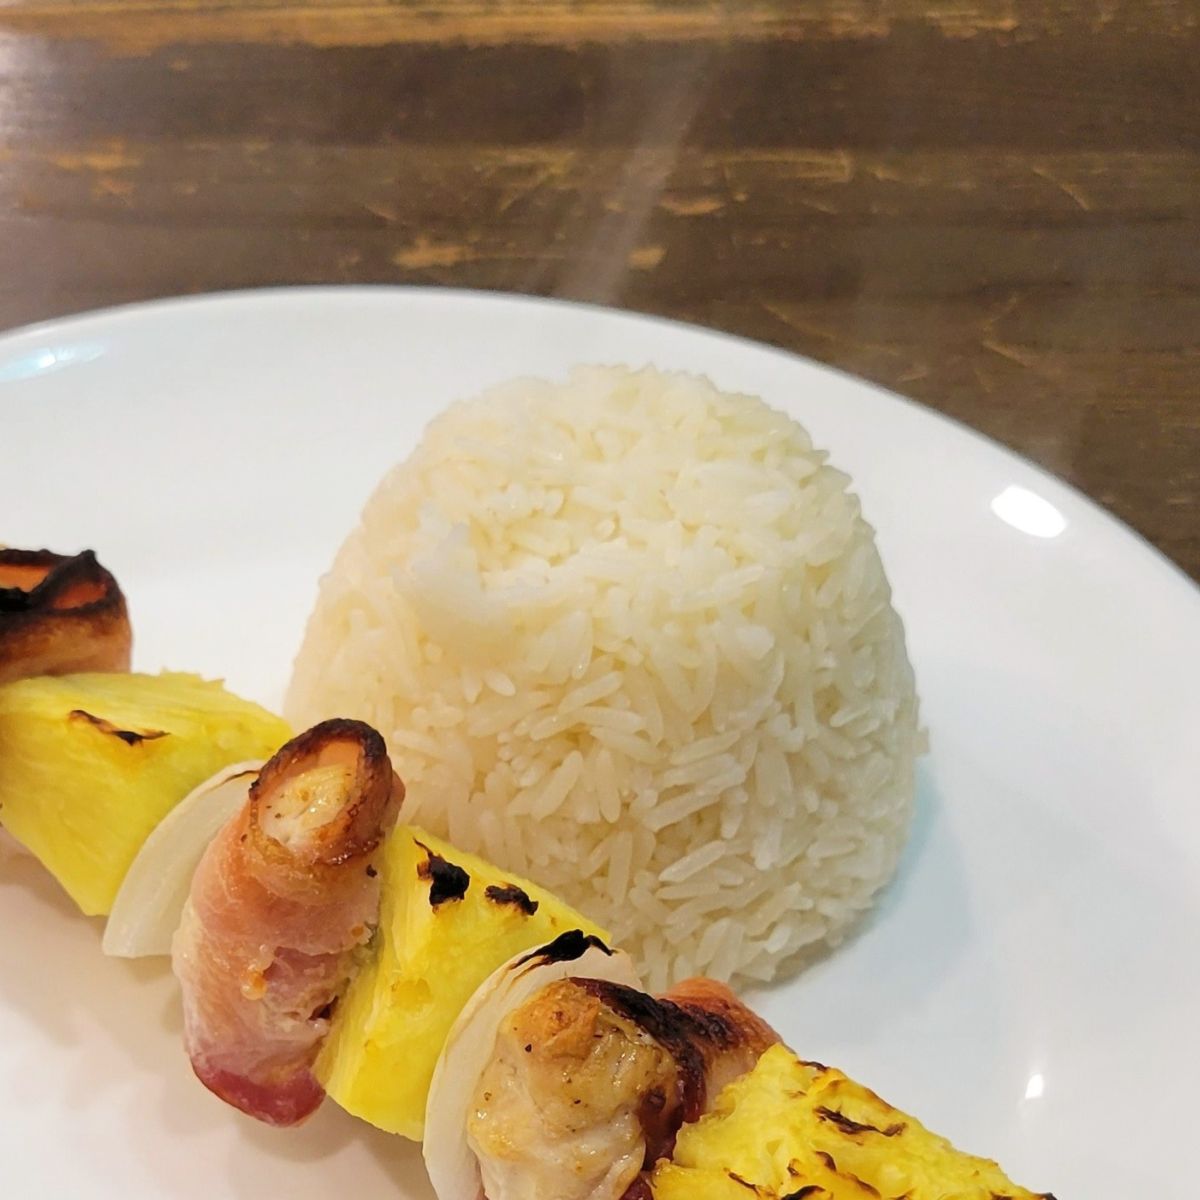 the perfect jasmine rice from the pressure cooker sitting next to a skewer.